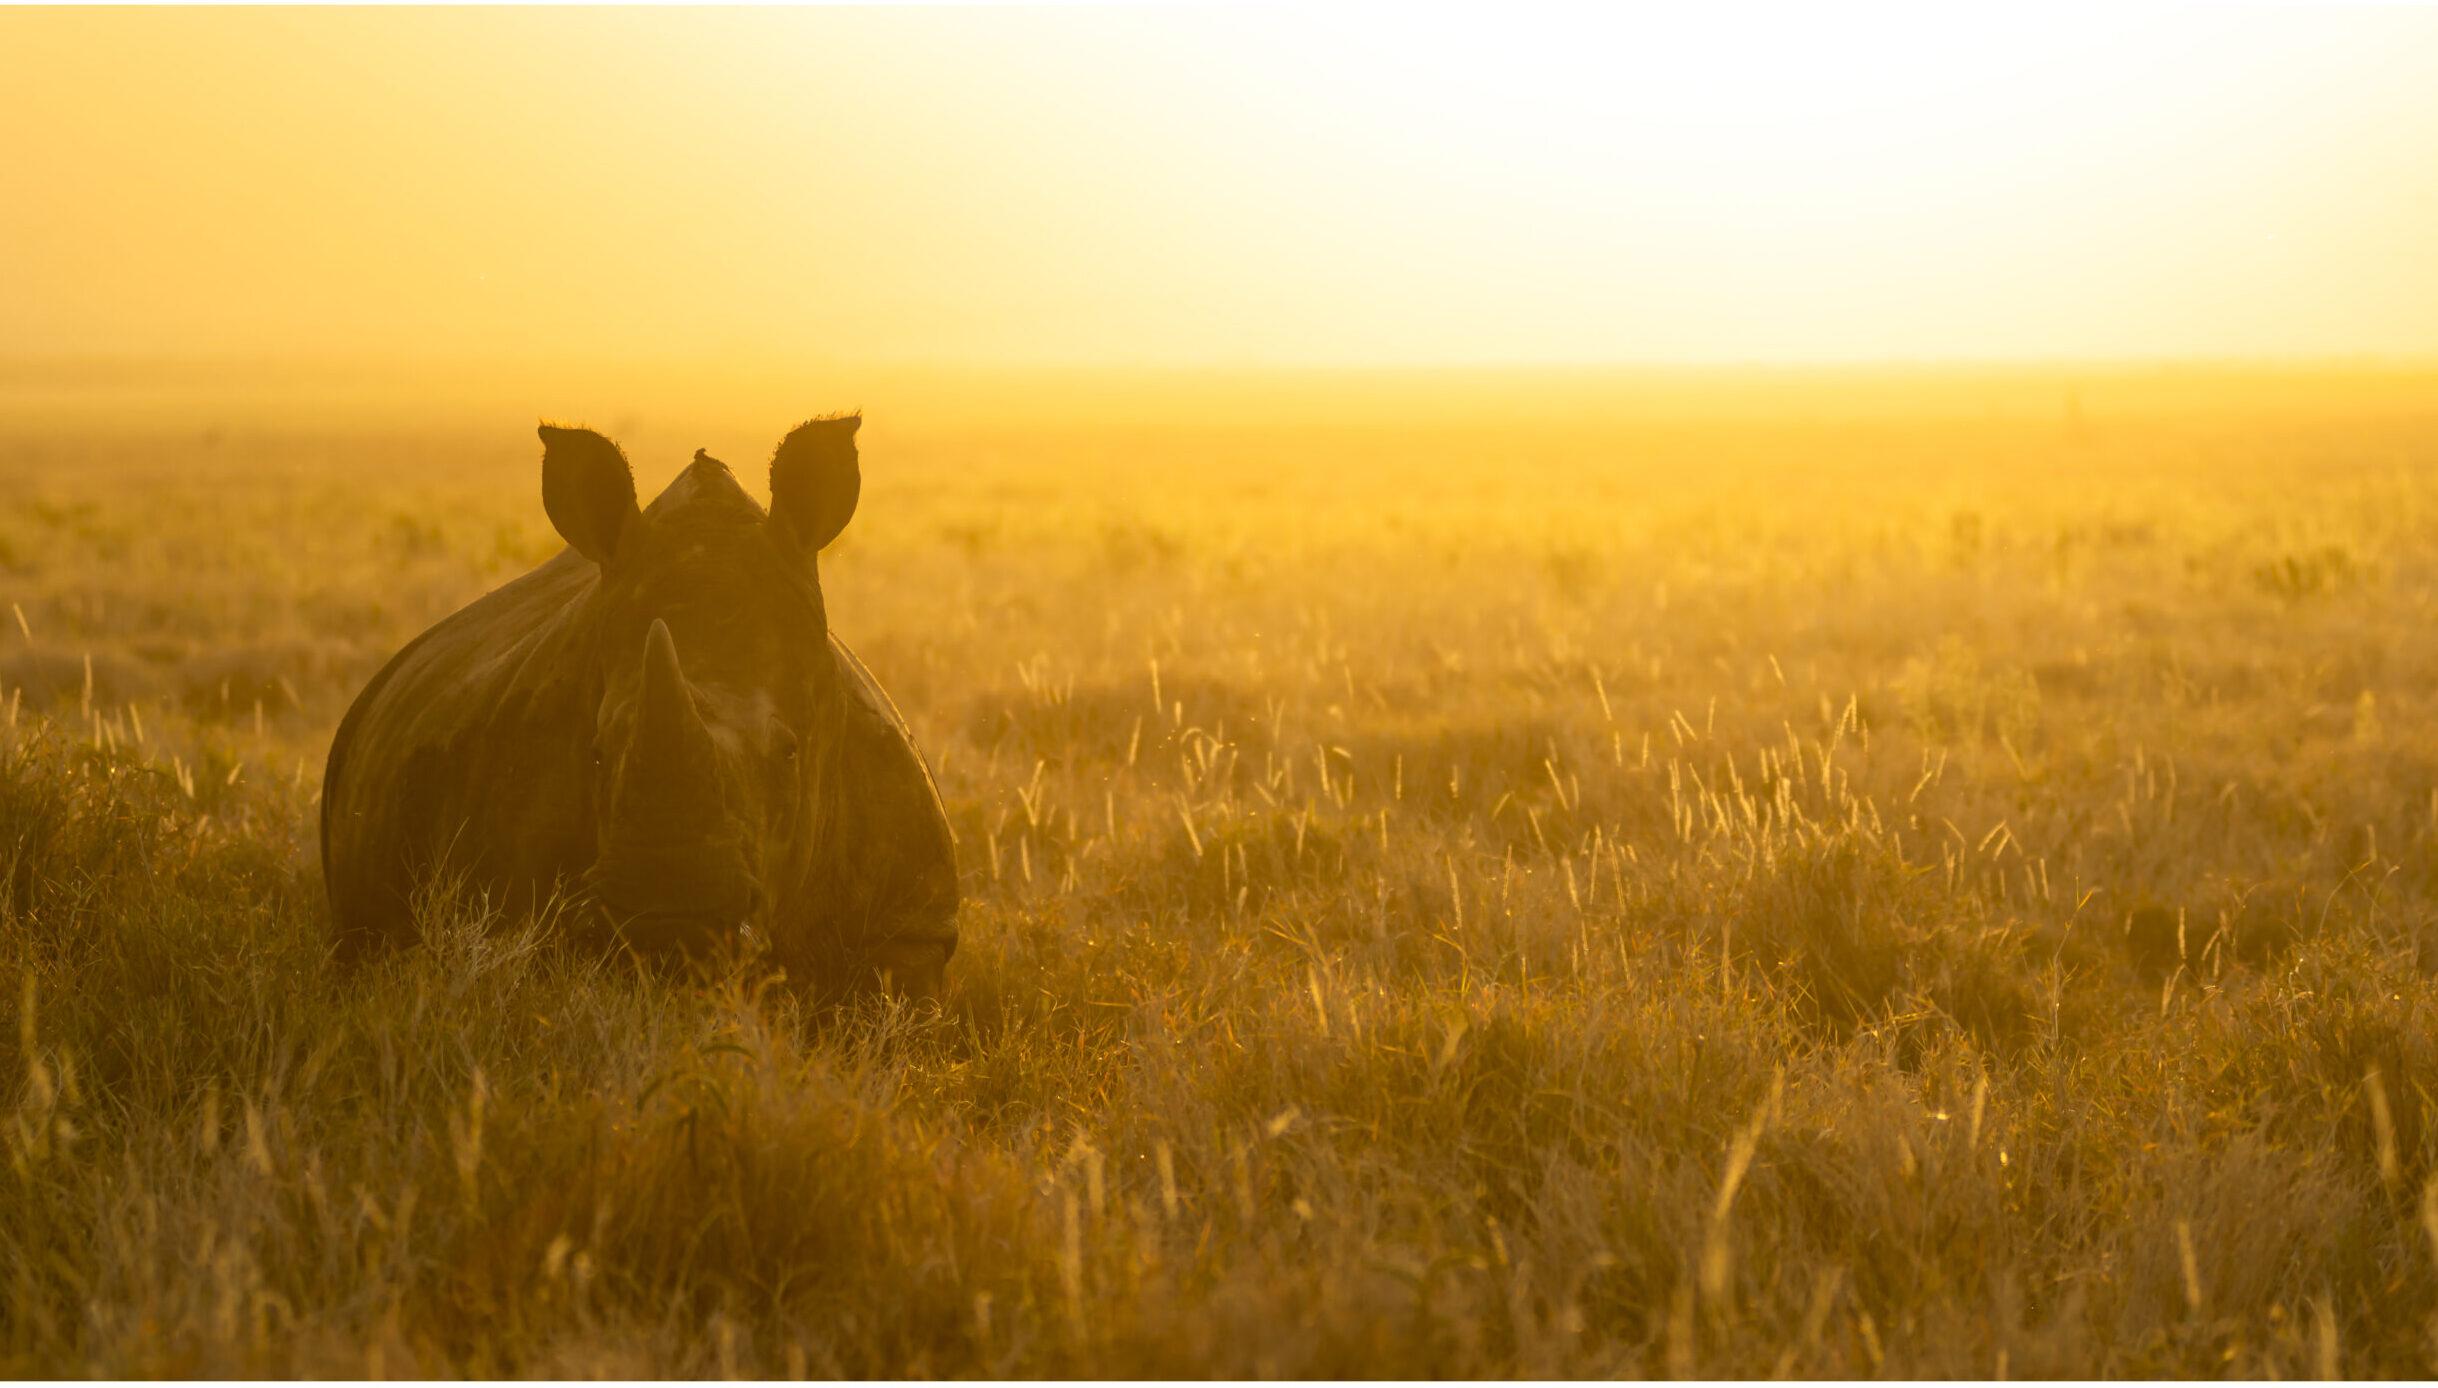 A rhino in the golden sunlight at sunset